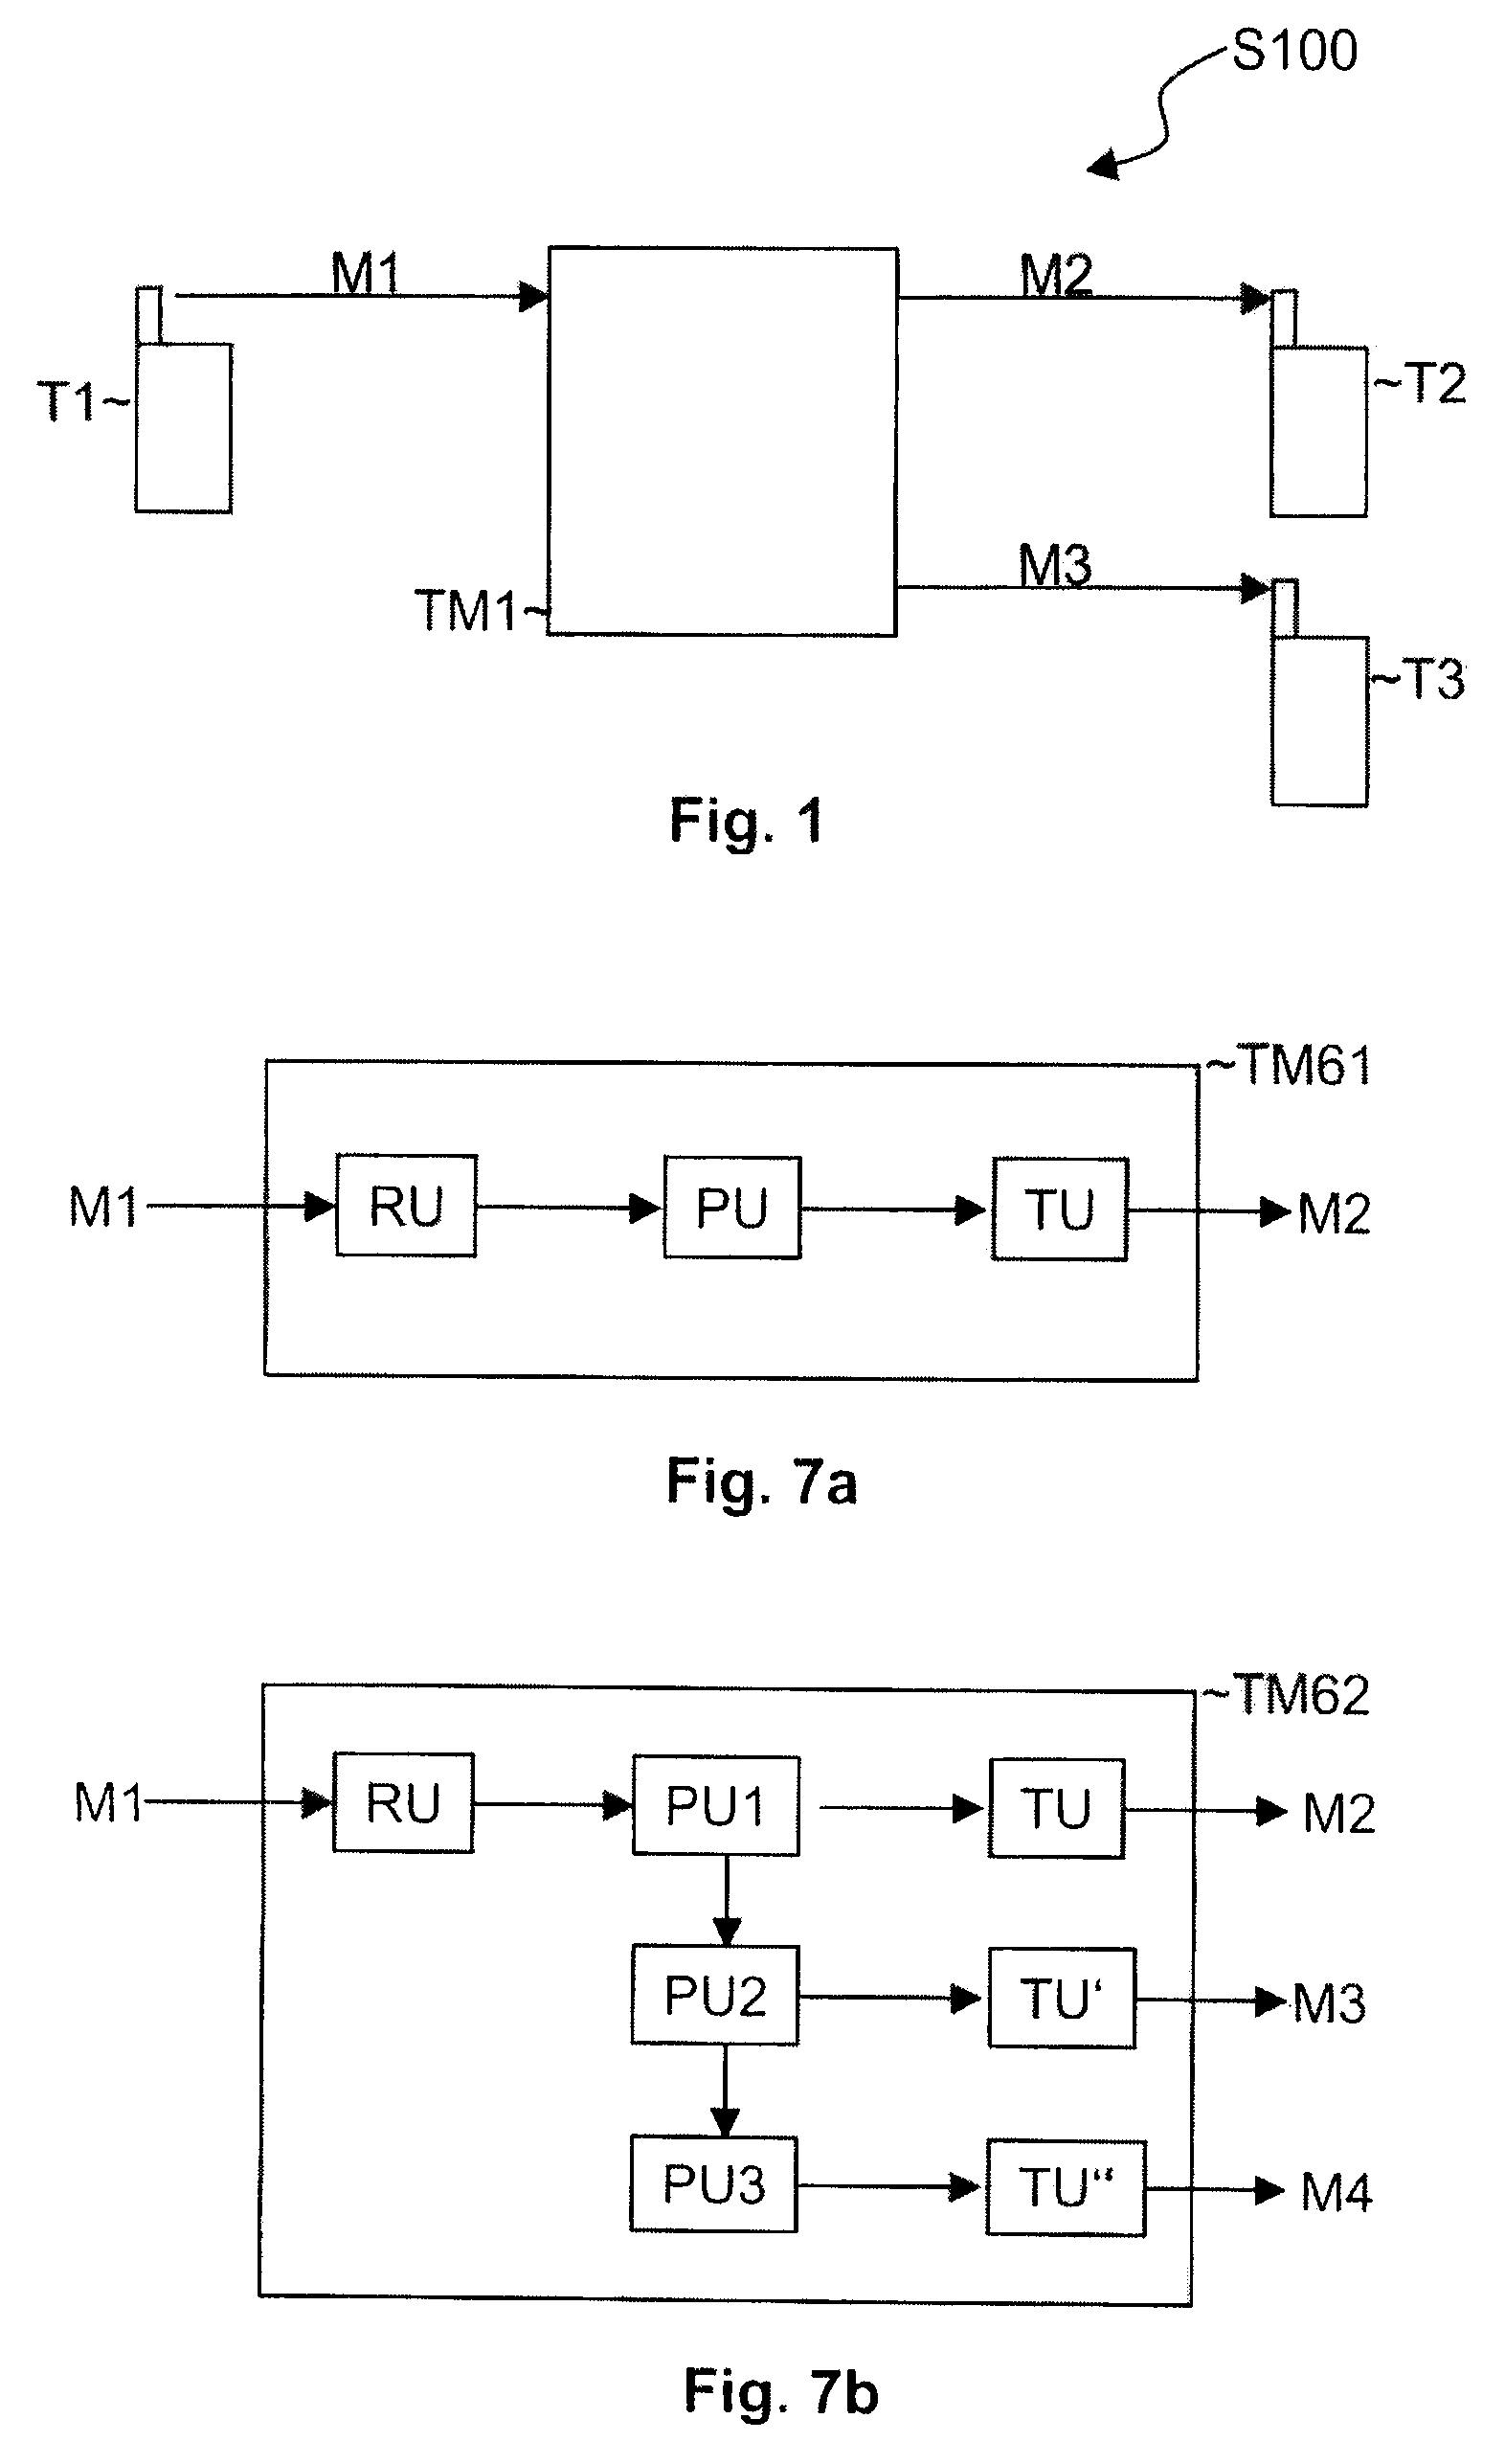 Method and device for changing an encoding mode of encoded data streams